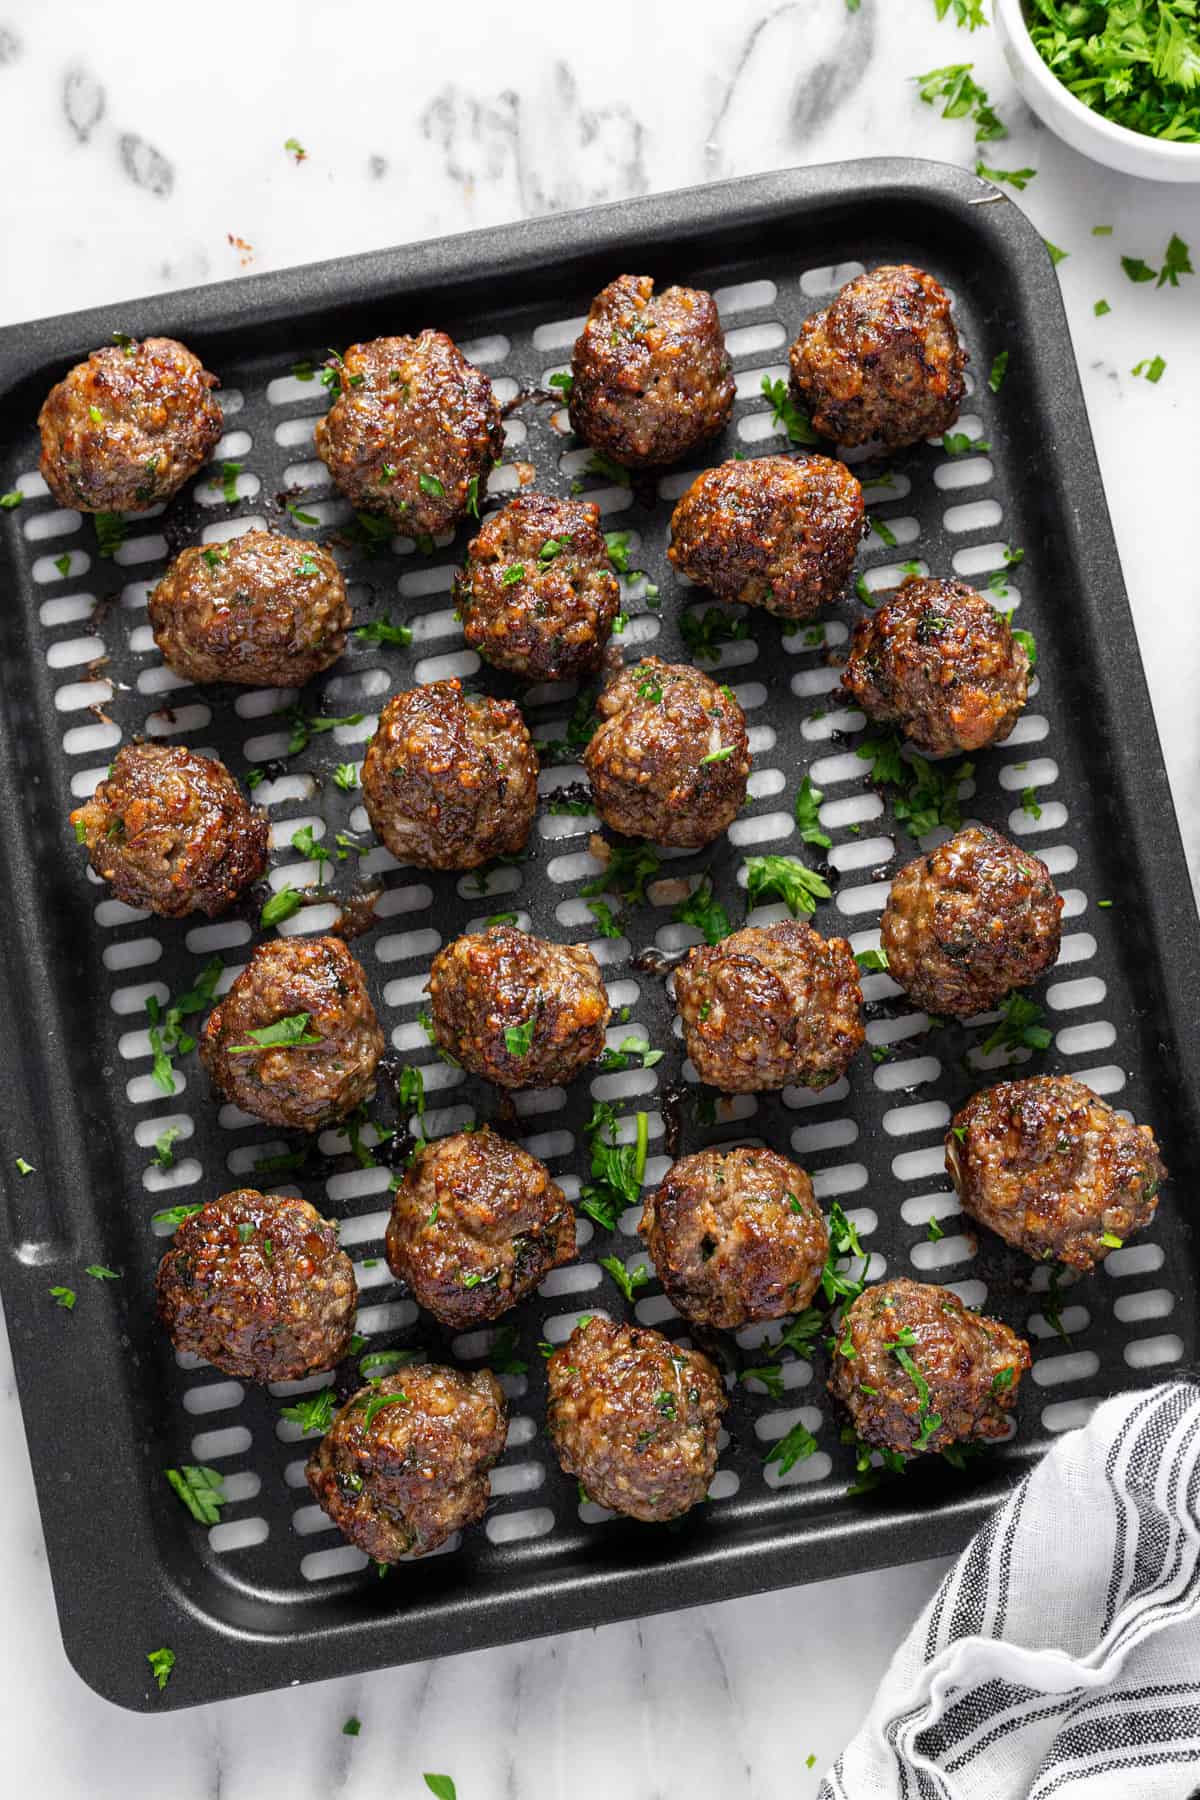 Air fryer tray with freshly cooked Italian meatballs garnished with parsley.